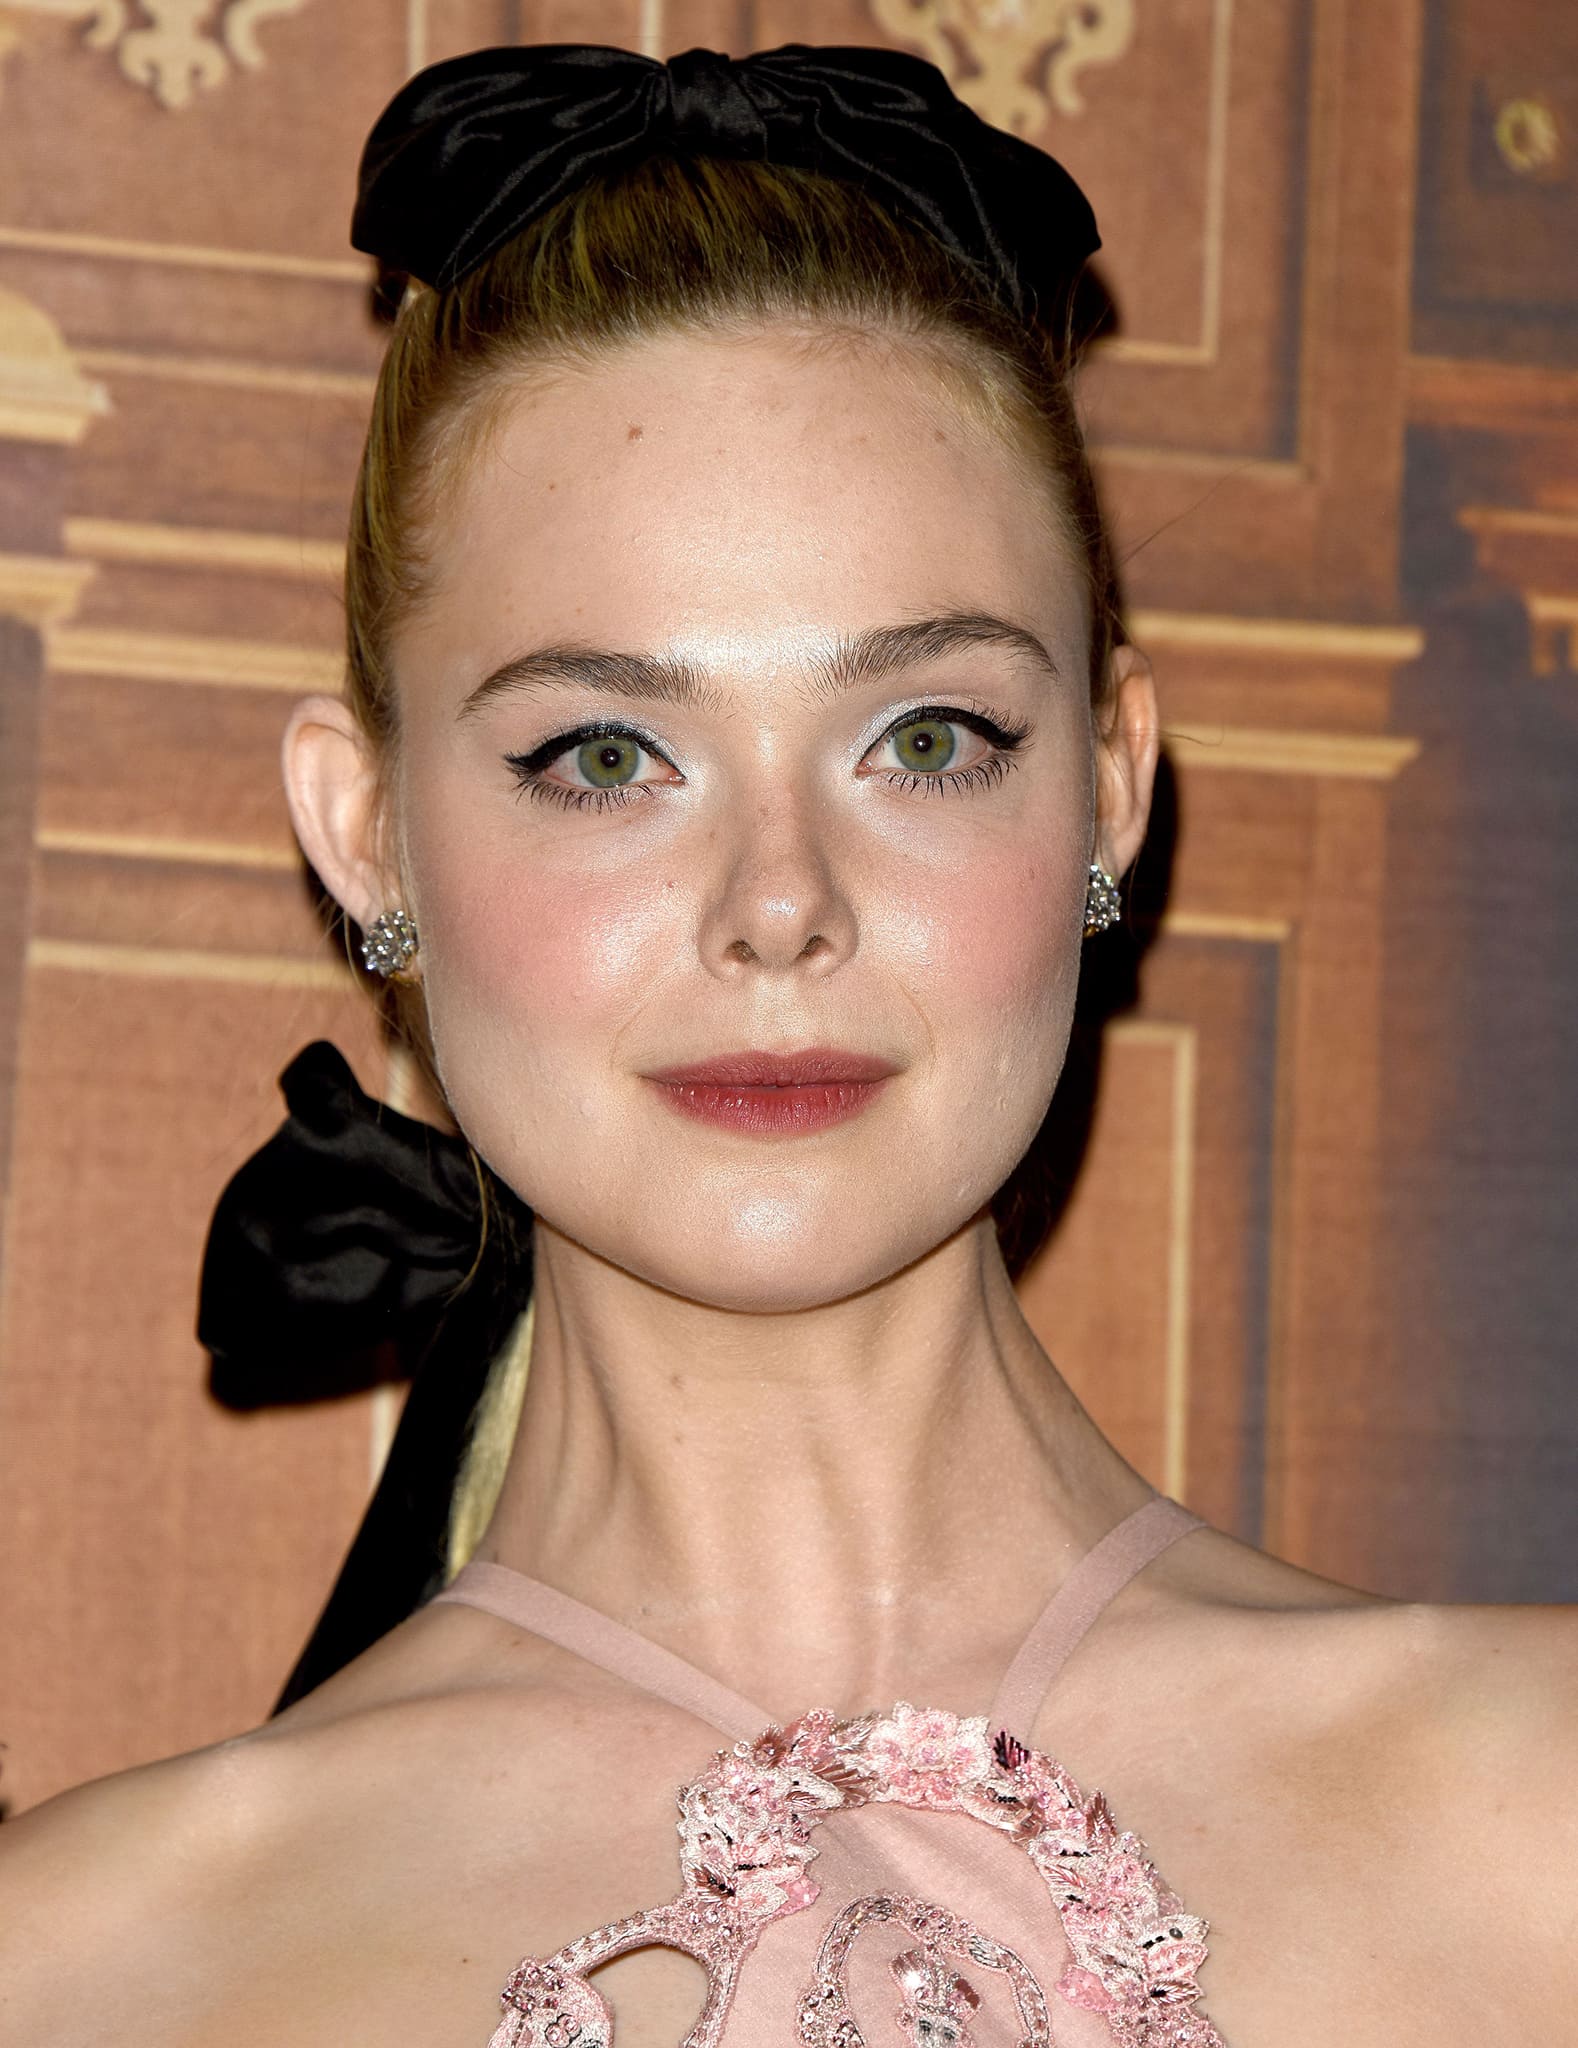 Elle Fanning pulls her tresses in a ponytail with black bow accents and wears winged eyeliner with red lipstick